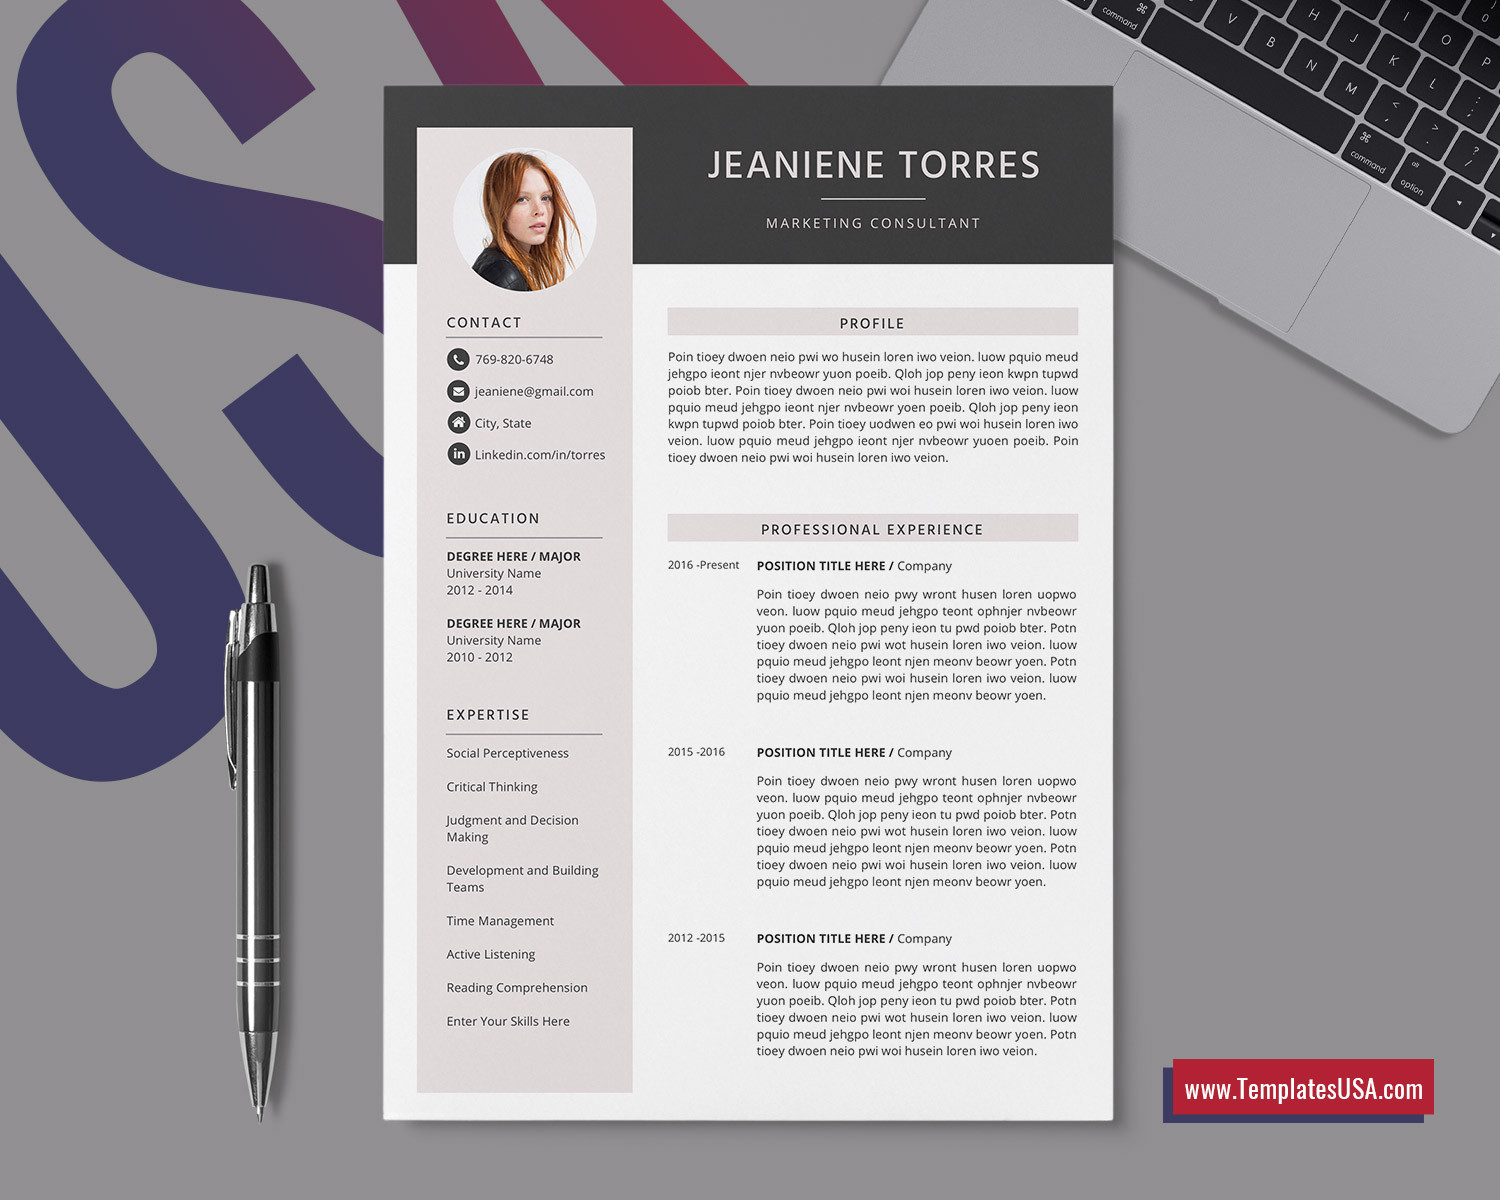 Best Resume Template to Get Hired Creating A Perfect Resume for 2021 Jobs â Purchase the One that is …